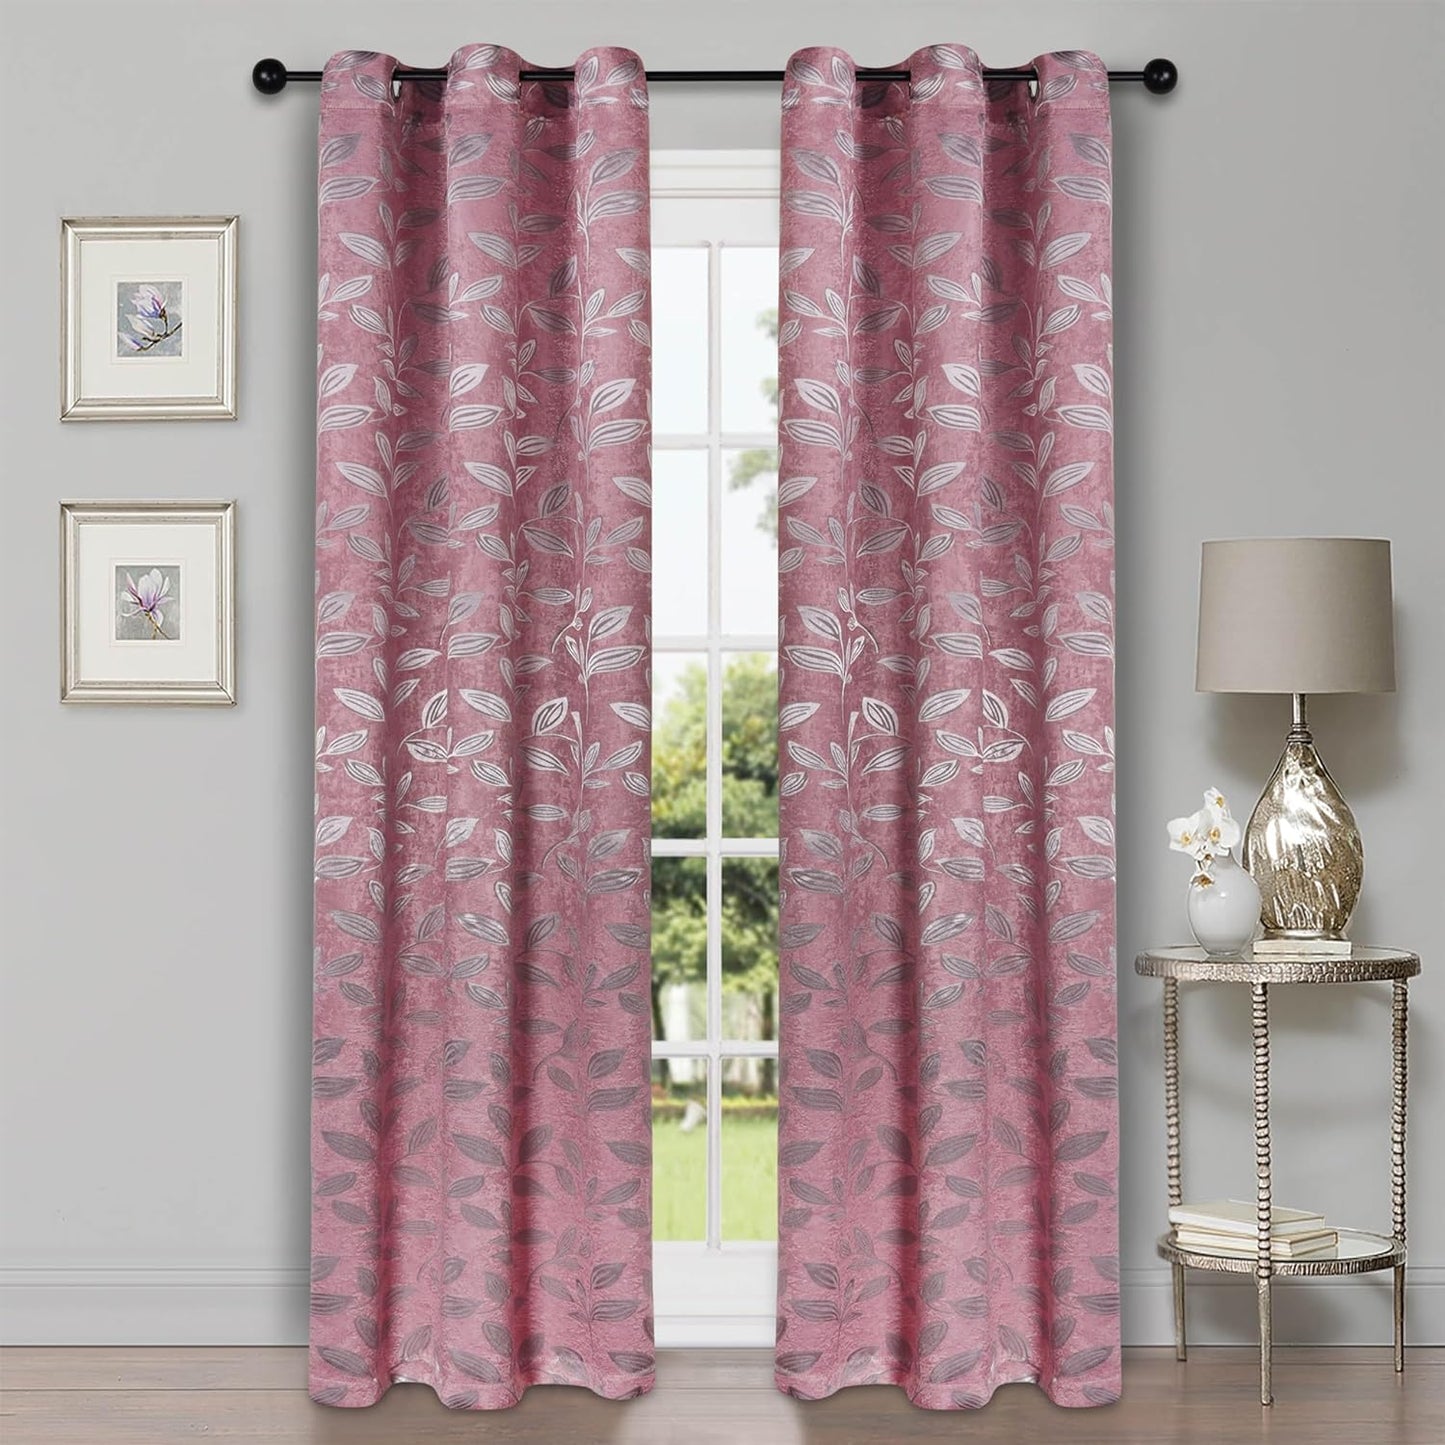 Superior Blackout Curtains, Room Darkening Window Accent for Bedroom, Sun Blocking, Thermal, Modern Bohemian Curtains, Leaves Collection, Set of 2 Panels, Rod Pocket - 52 in X 63 In, Nickel Black  Home City Inc. Blush 42 In X 84 In (W X L) 